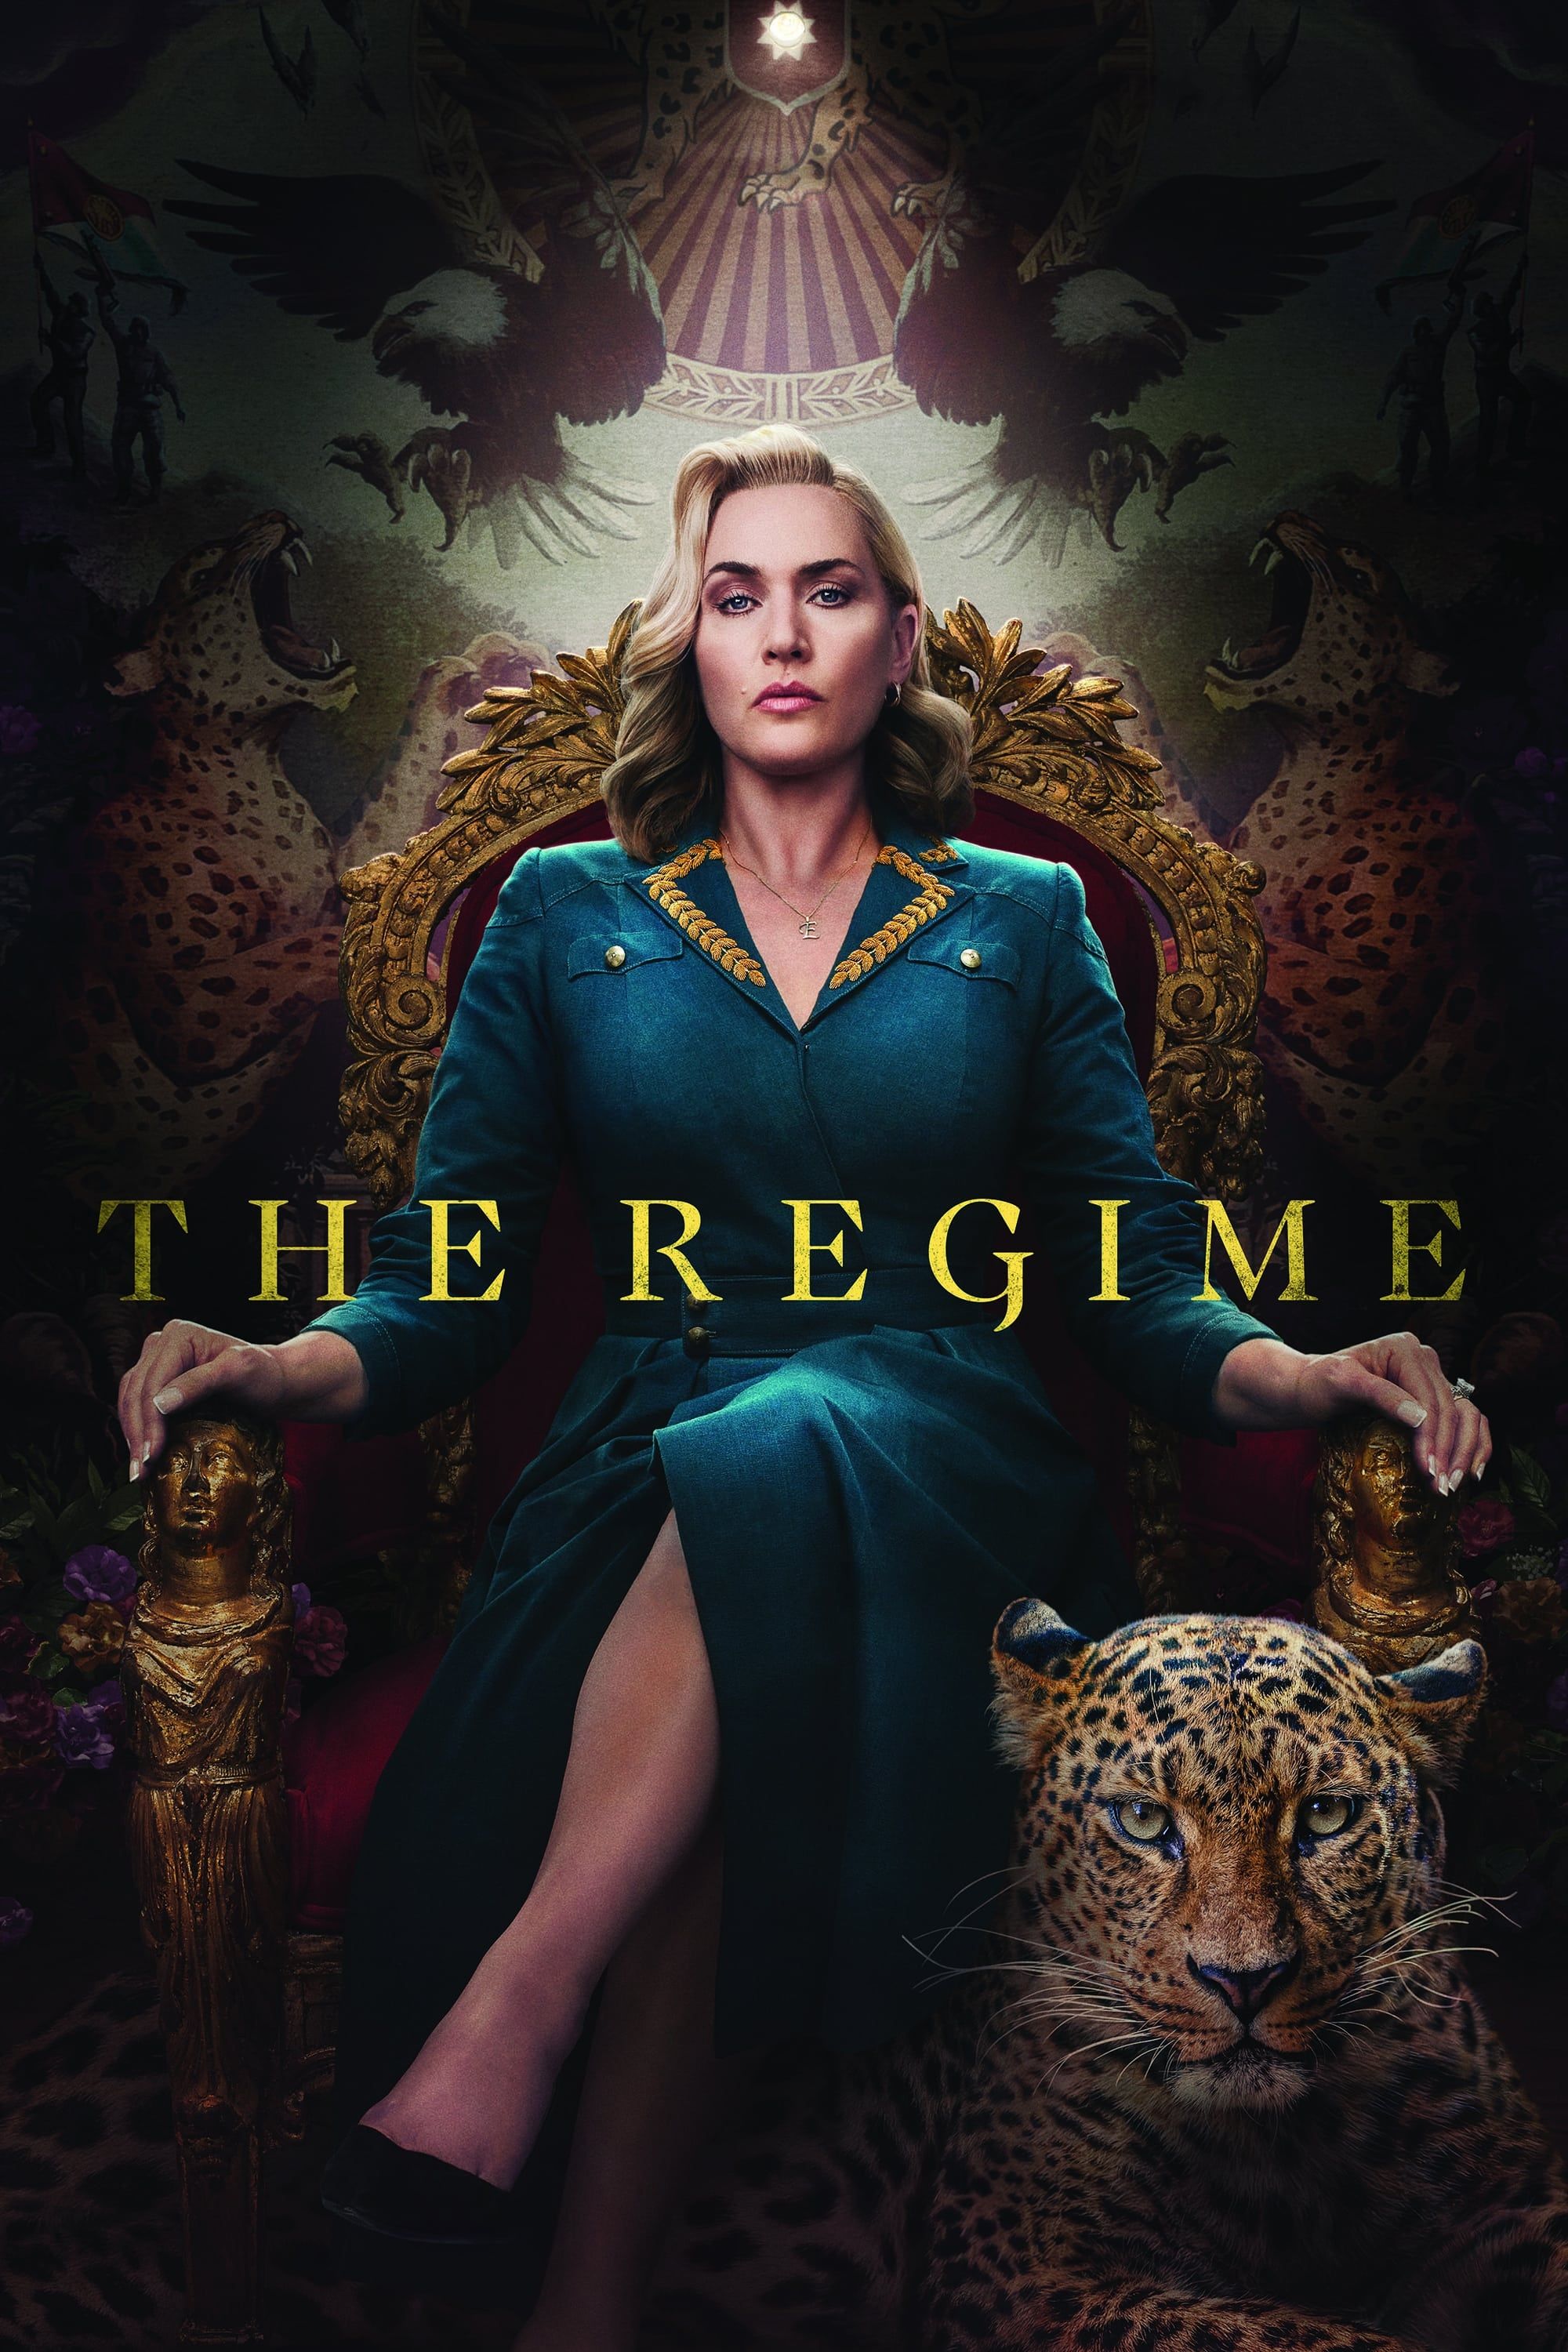 The Regime TV Show Poster Showing Kate Winslet Sitting in a Chair Next to a Tiger